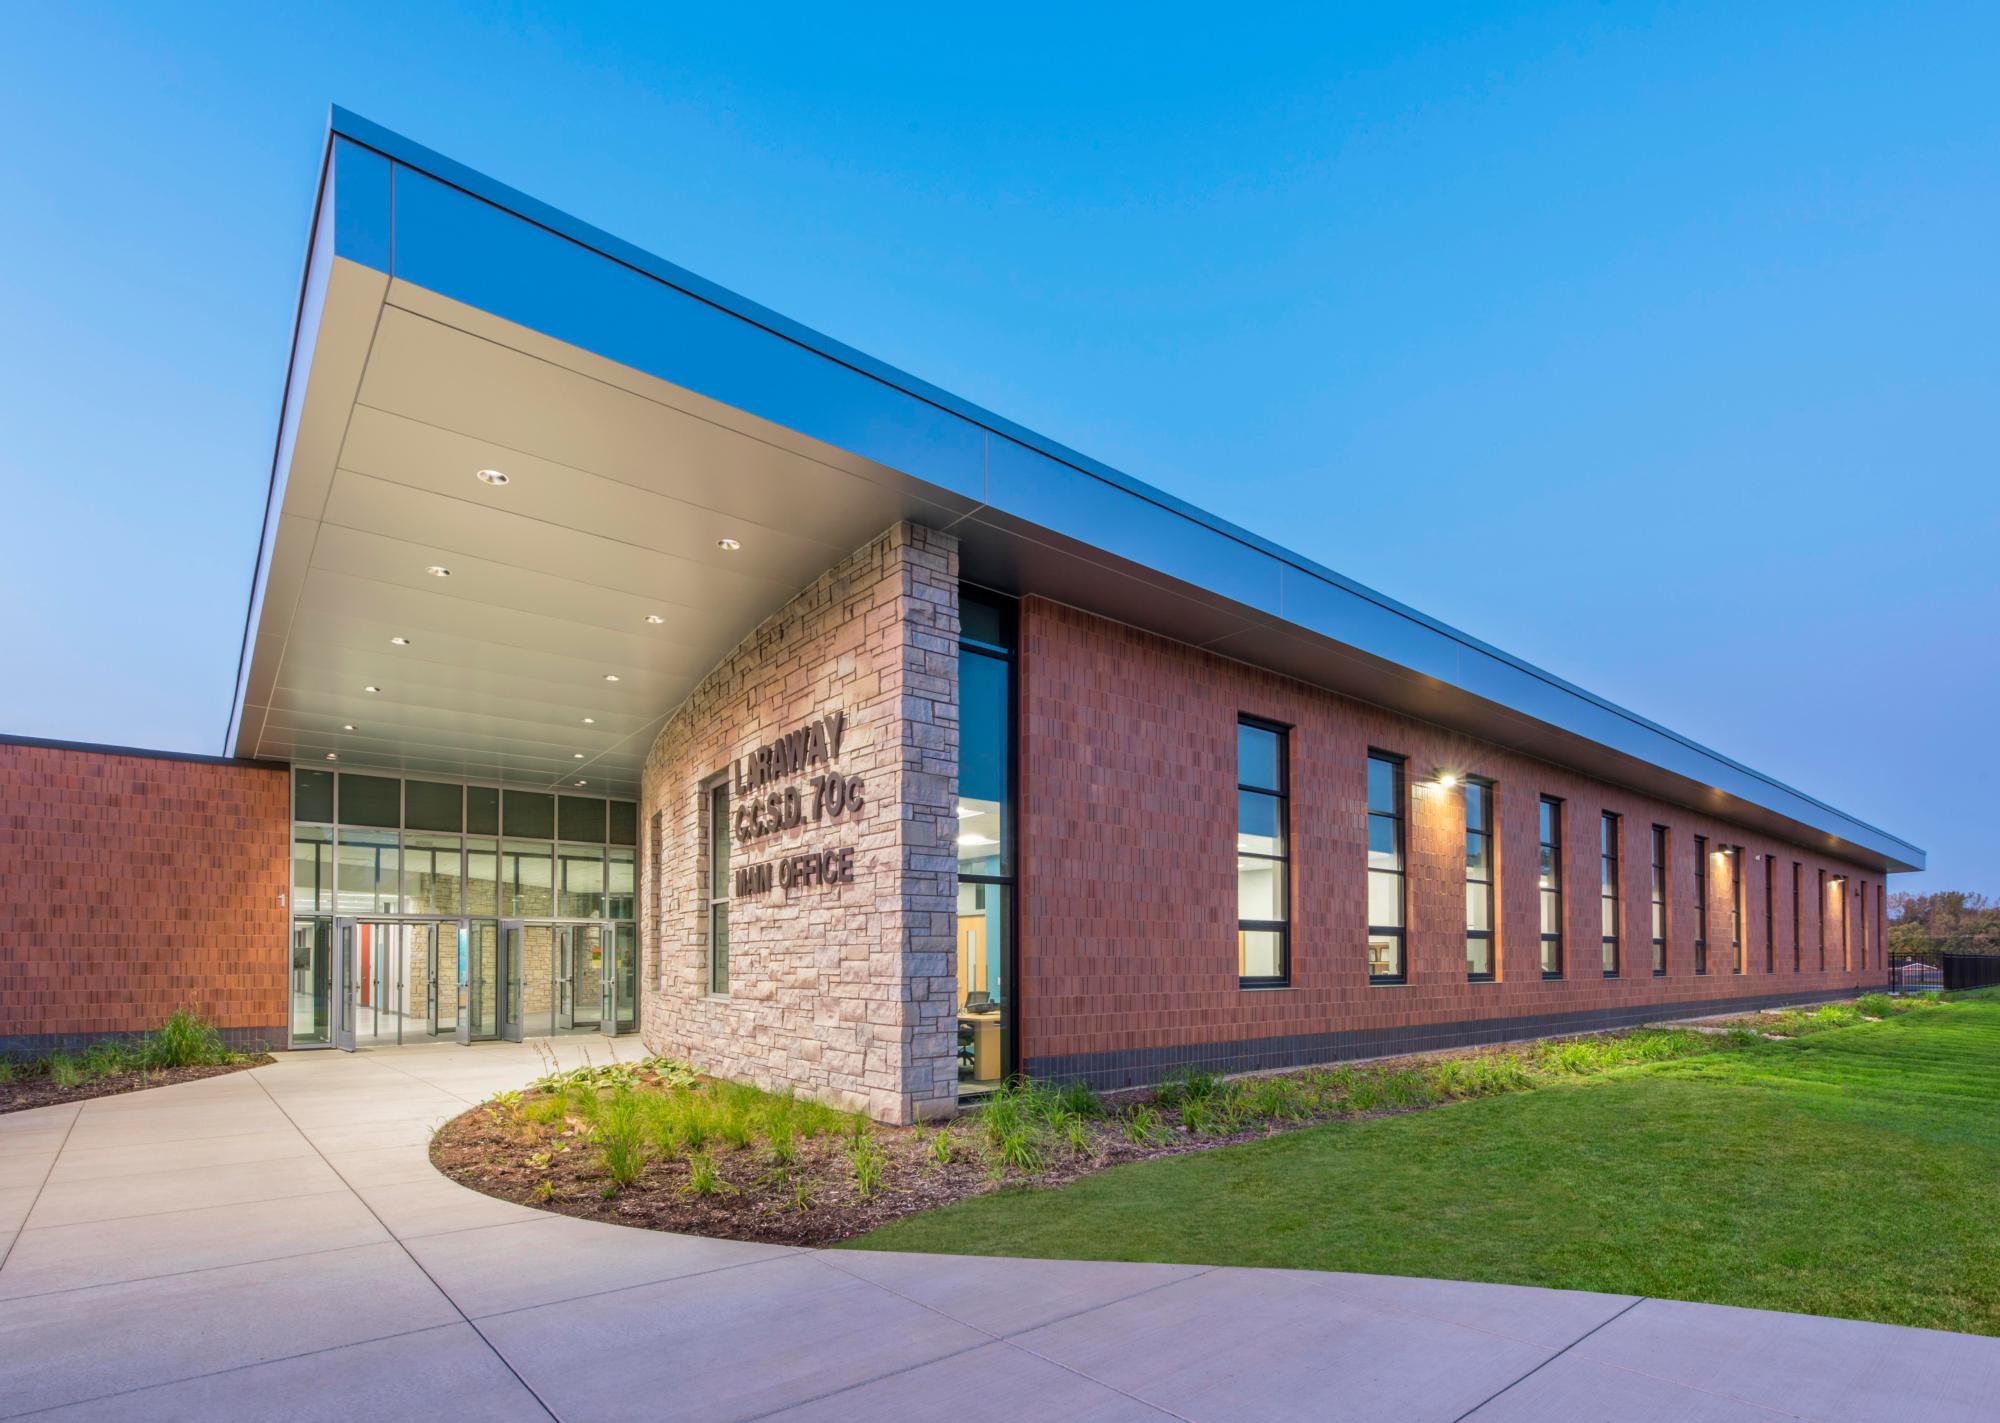 Image of the paved entryway into the red bricked New Laraway Elementary School